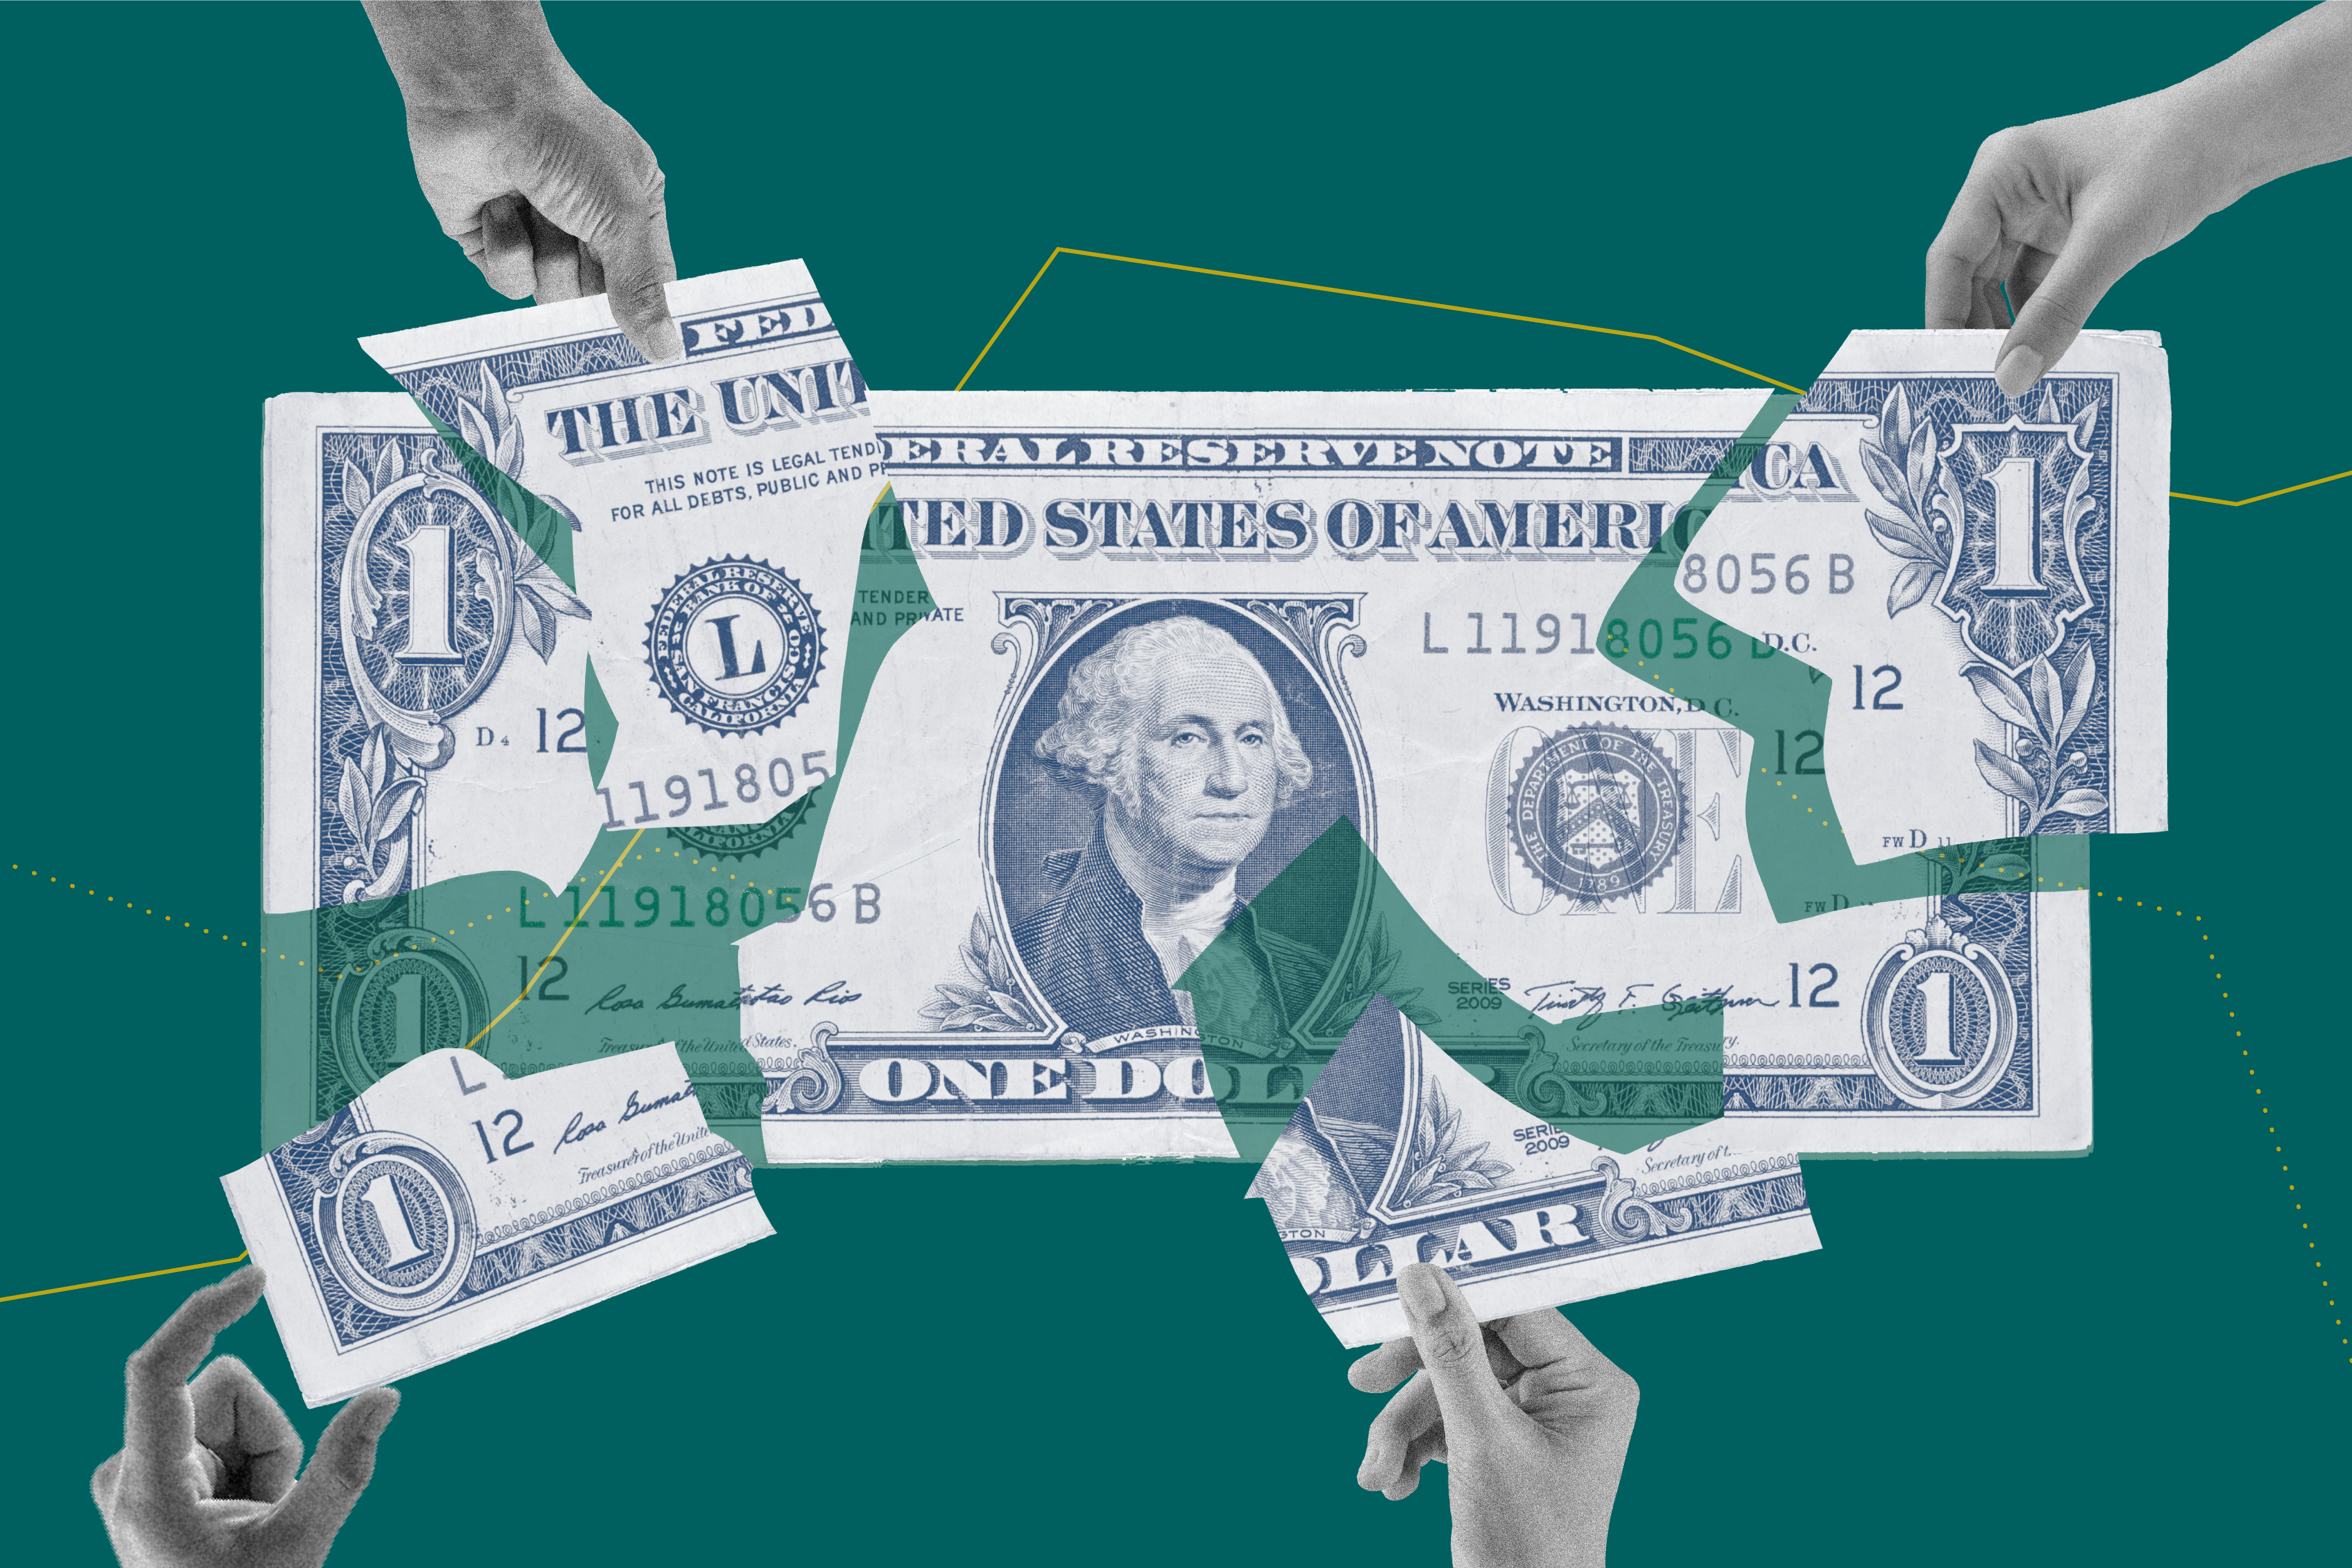 Illustration shows a U.S. dollar bill ripped into pieces with several hands reaching for a piece